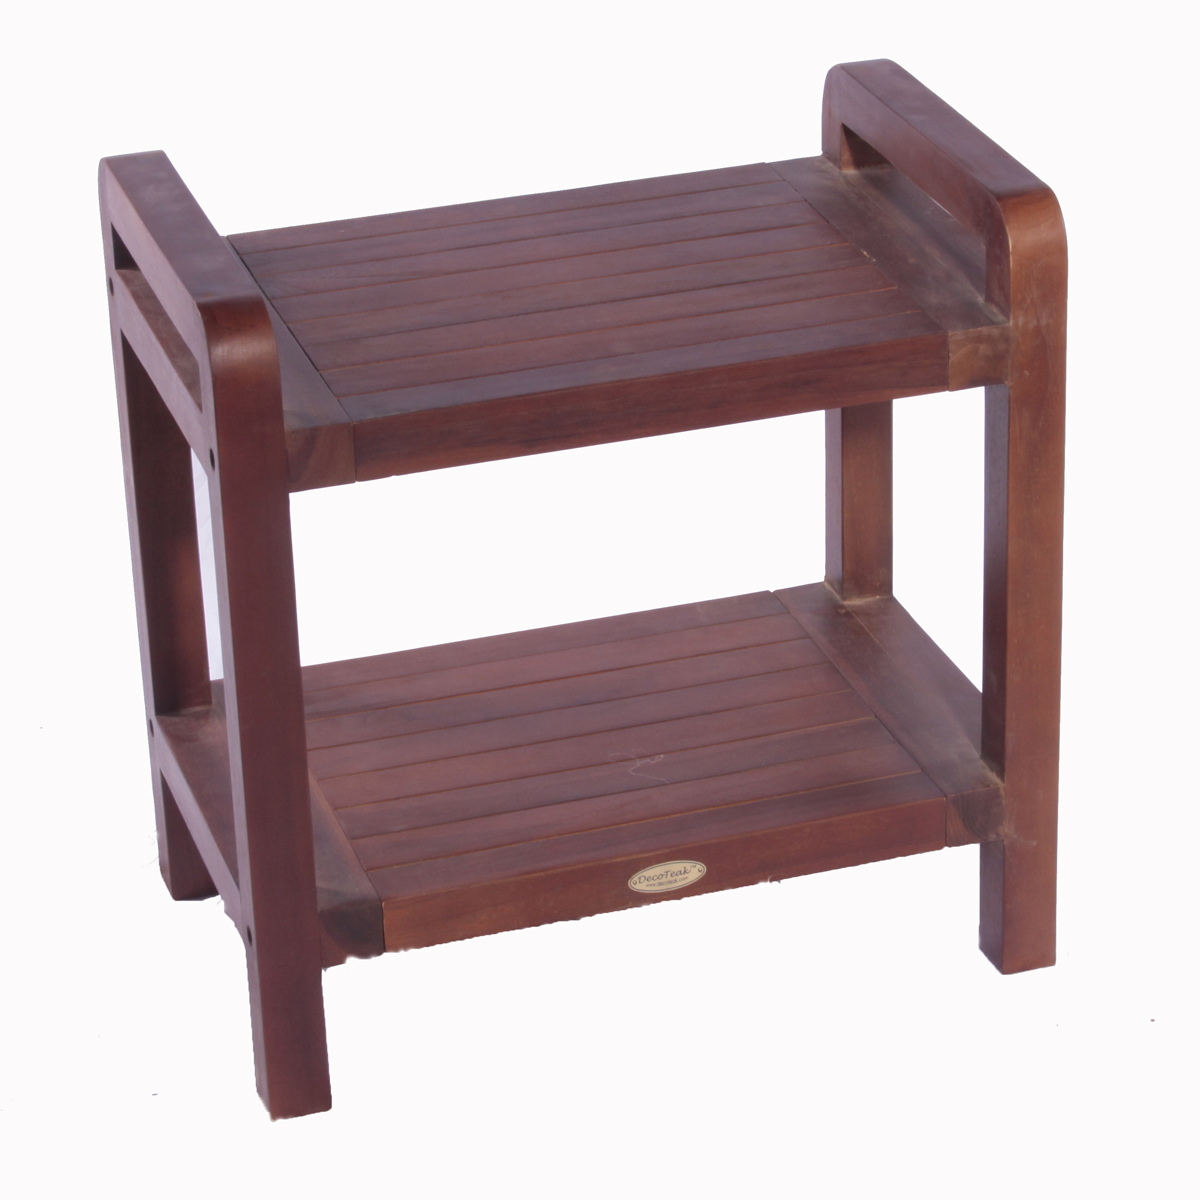 DT108 Classic Teak Shower Bench with Shelf and Arms